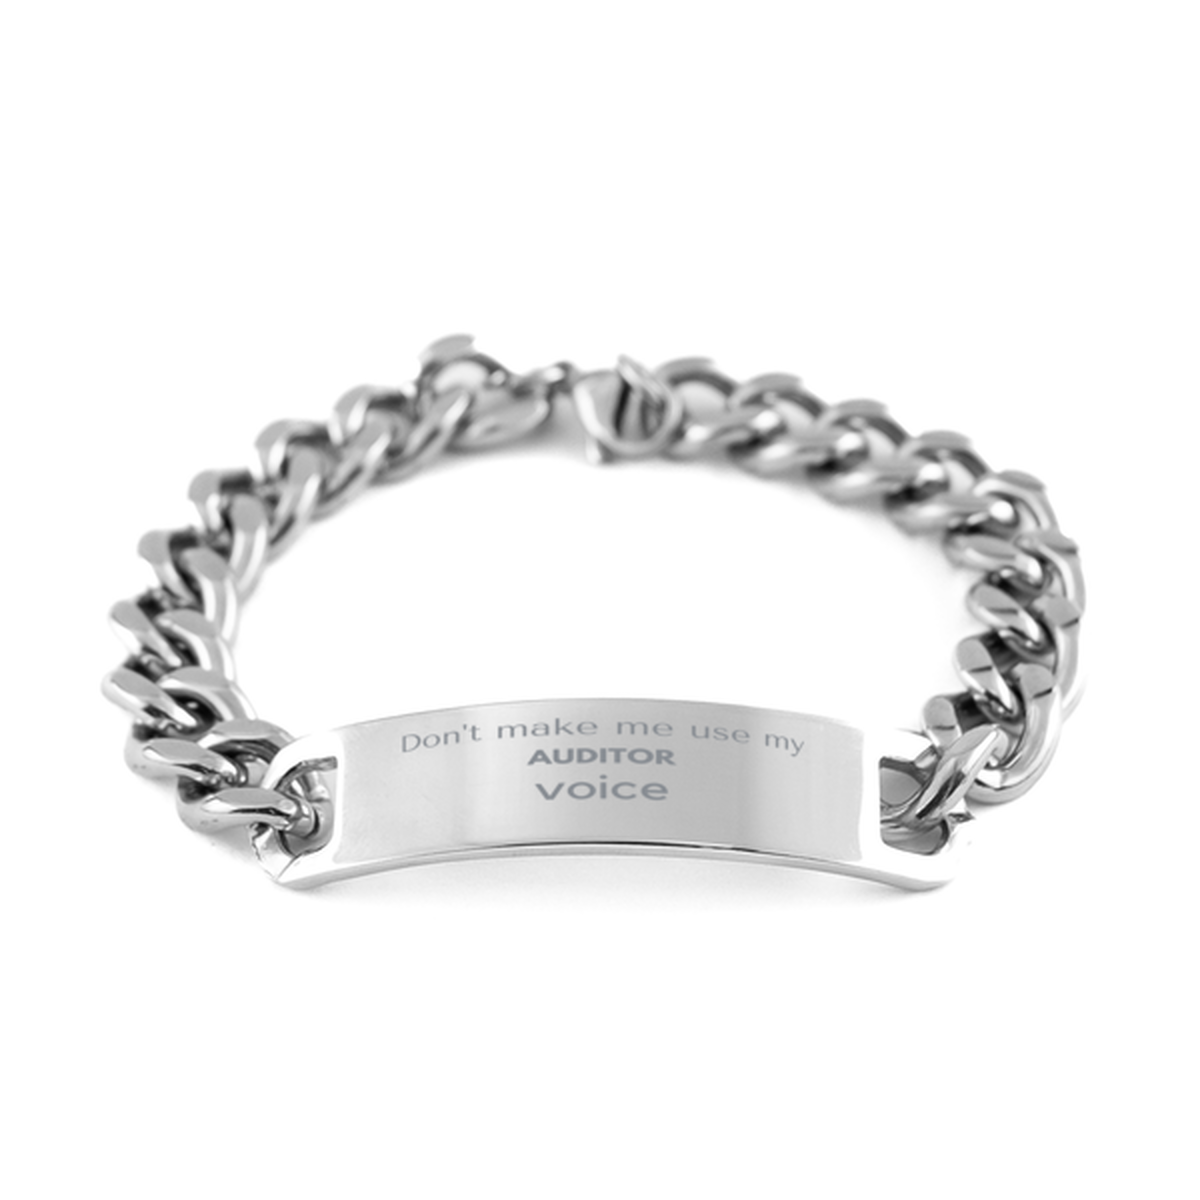 Don't make me use my Auditor voice, Sarcasm Auditor Gifts, Christmas Auditor Cuban Chain Stainless Steel Bracelet Birthday Unique Gifts For Auditor Coworkers, Men, Women, Colleague, Friends